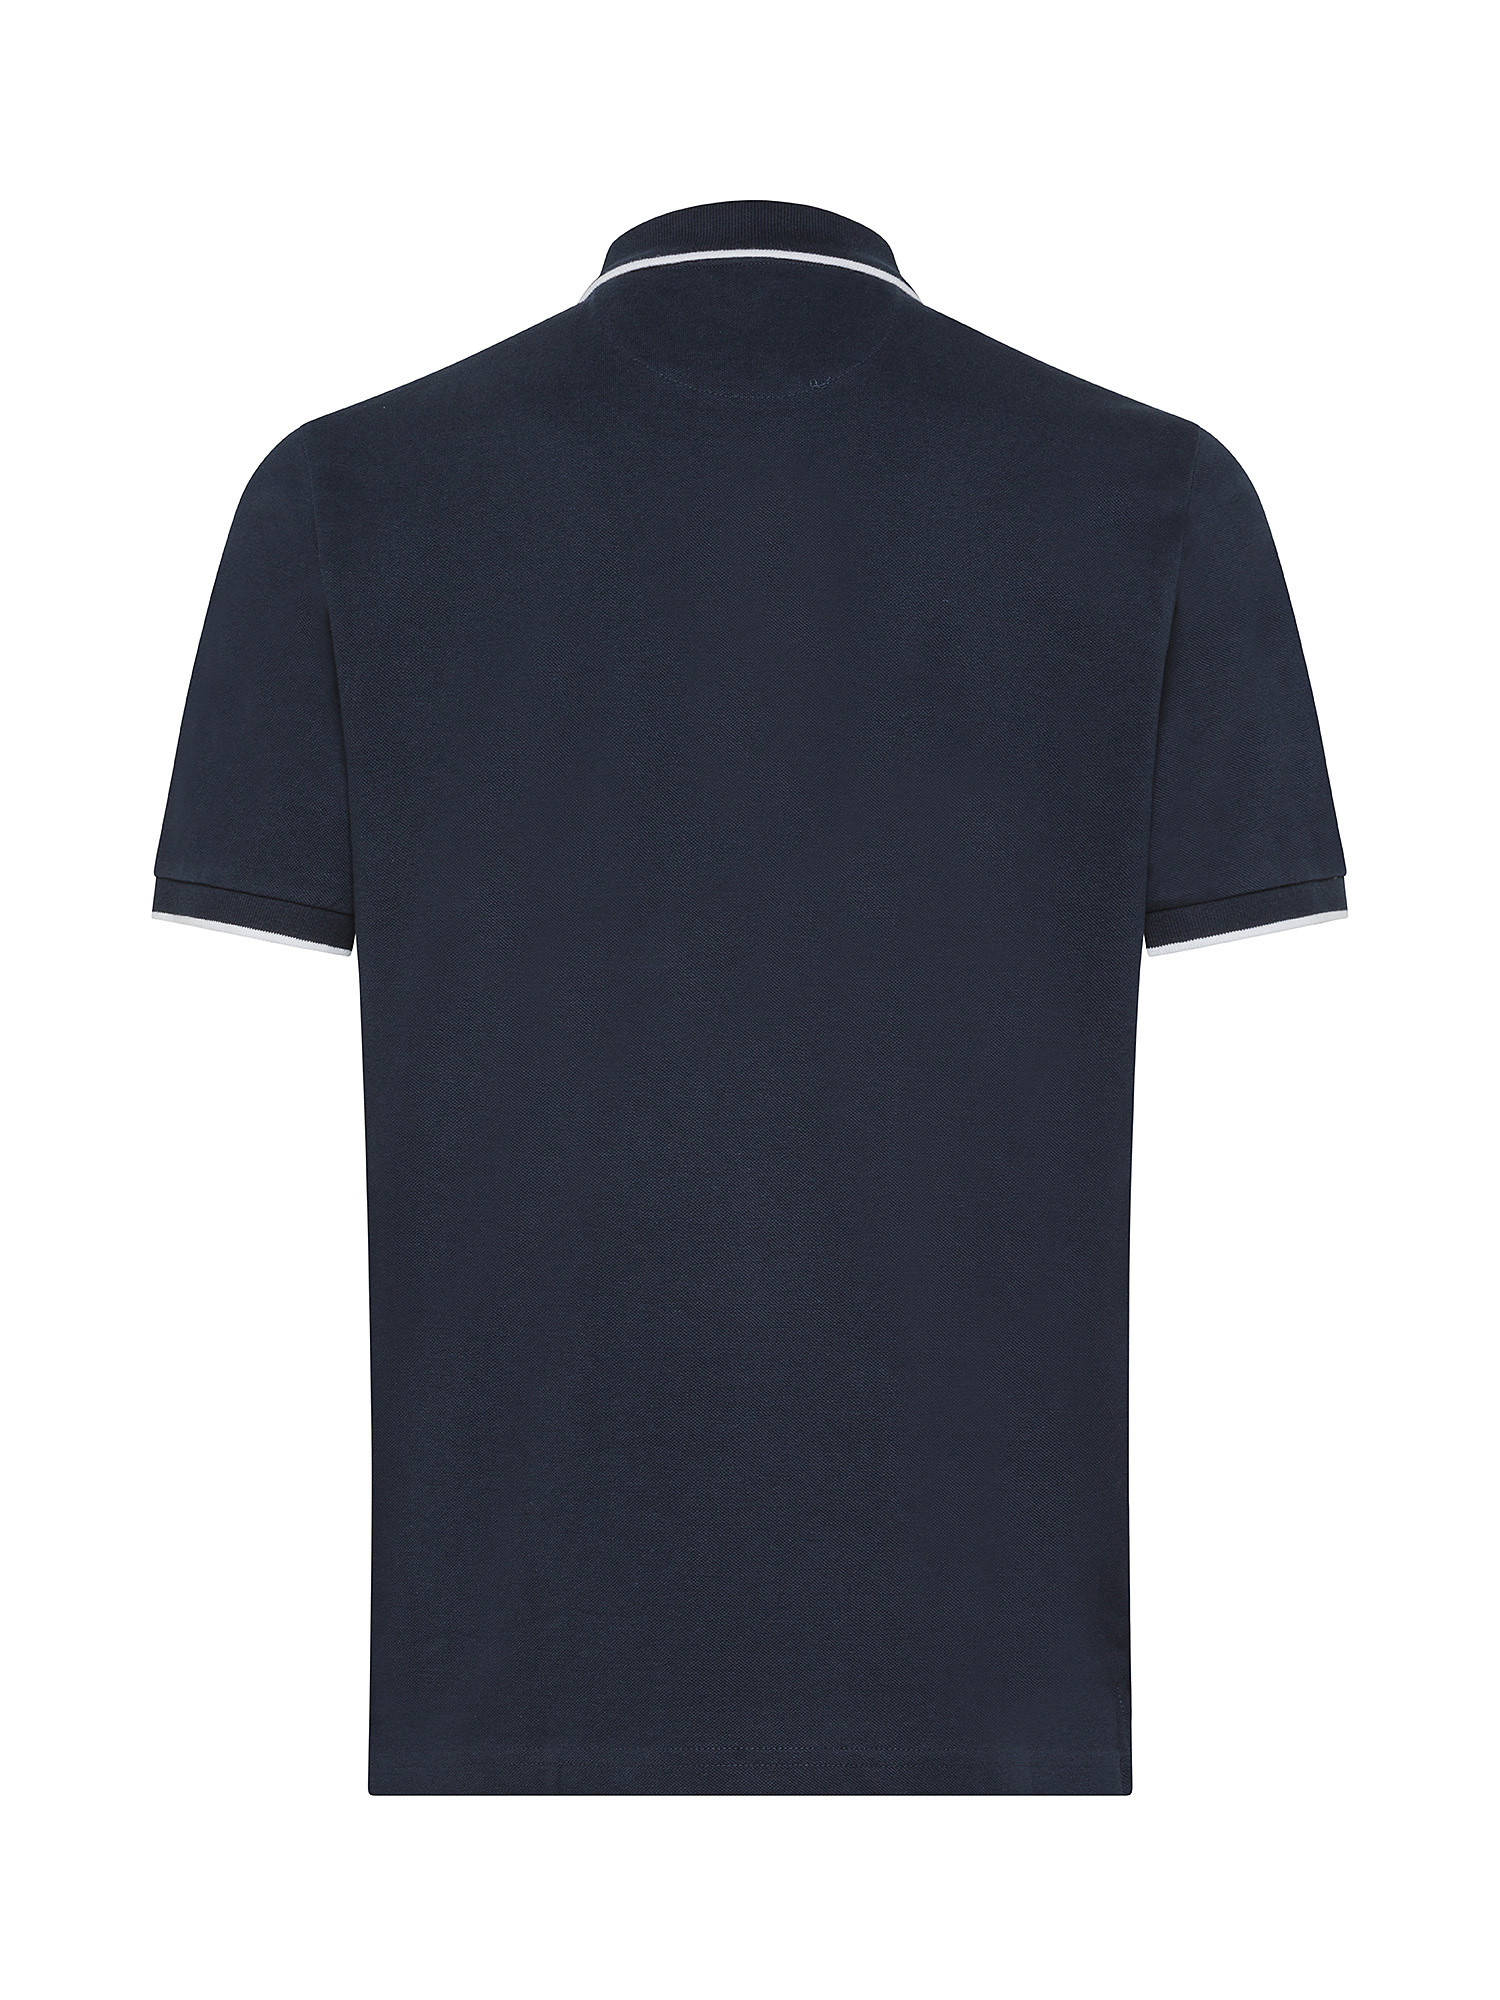 North Sails - Organic cotton piqué polo shirt with micrologo, Blue, large image number 1